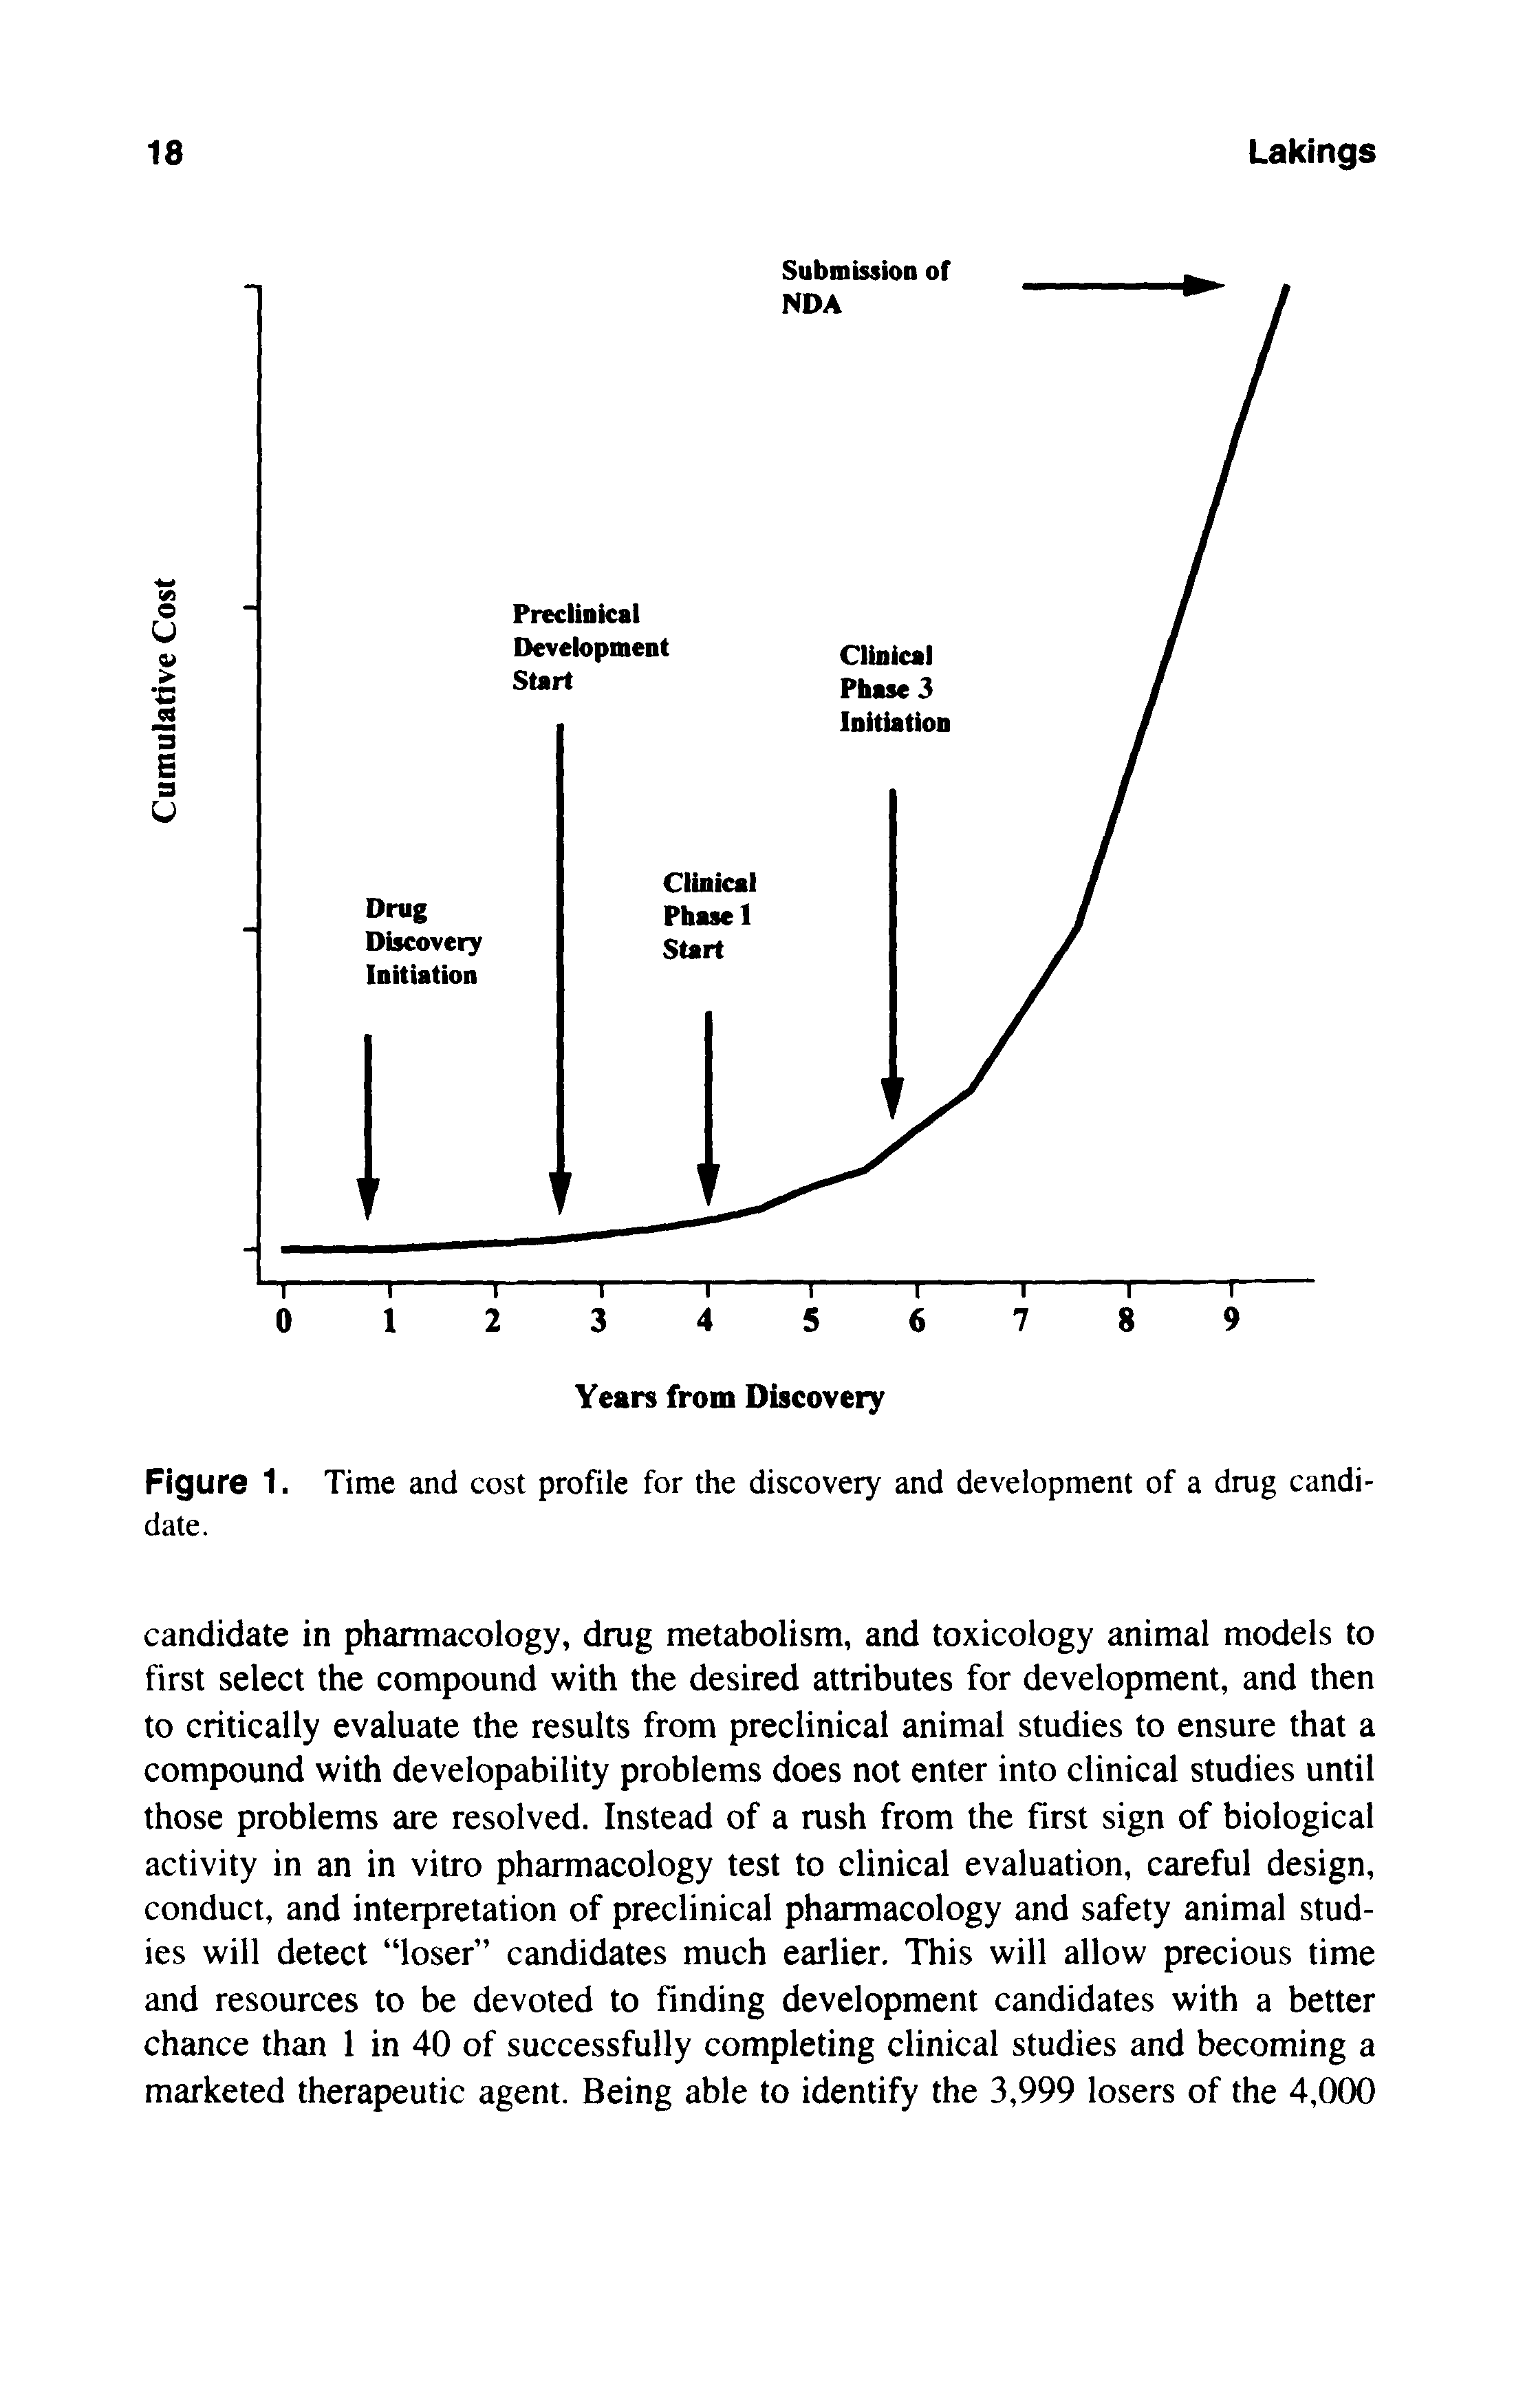 Figure 1. Time and cost profile for the discovery and development of a drug candidate.